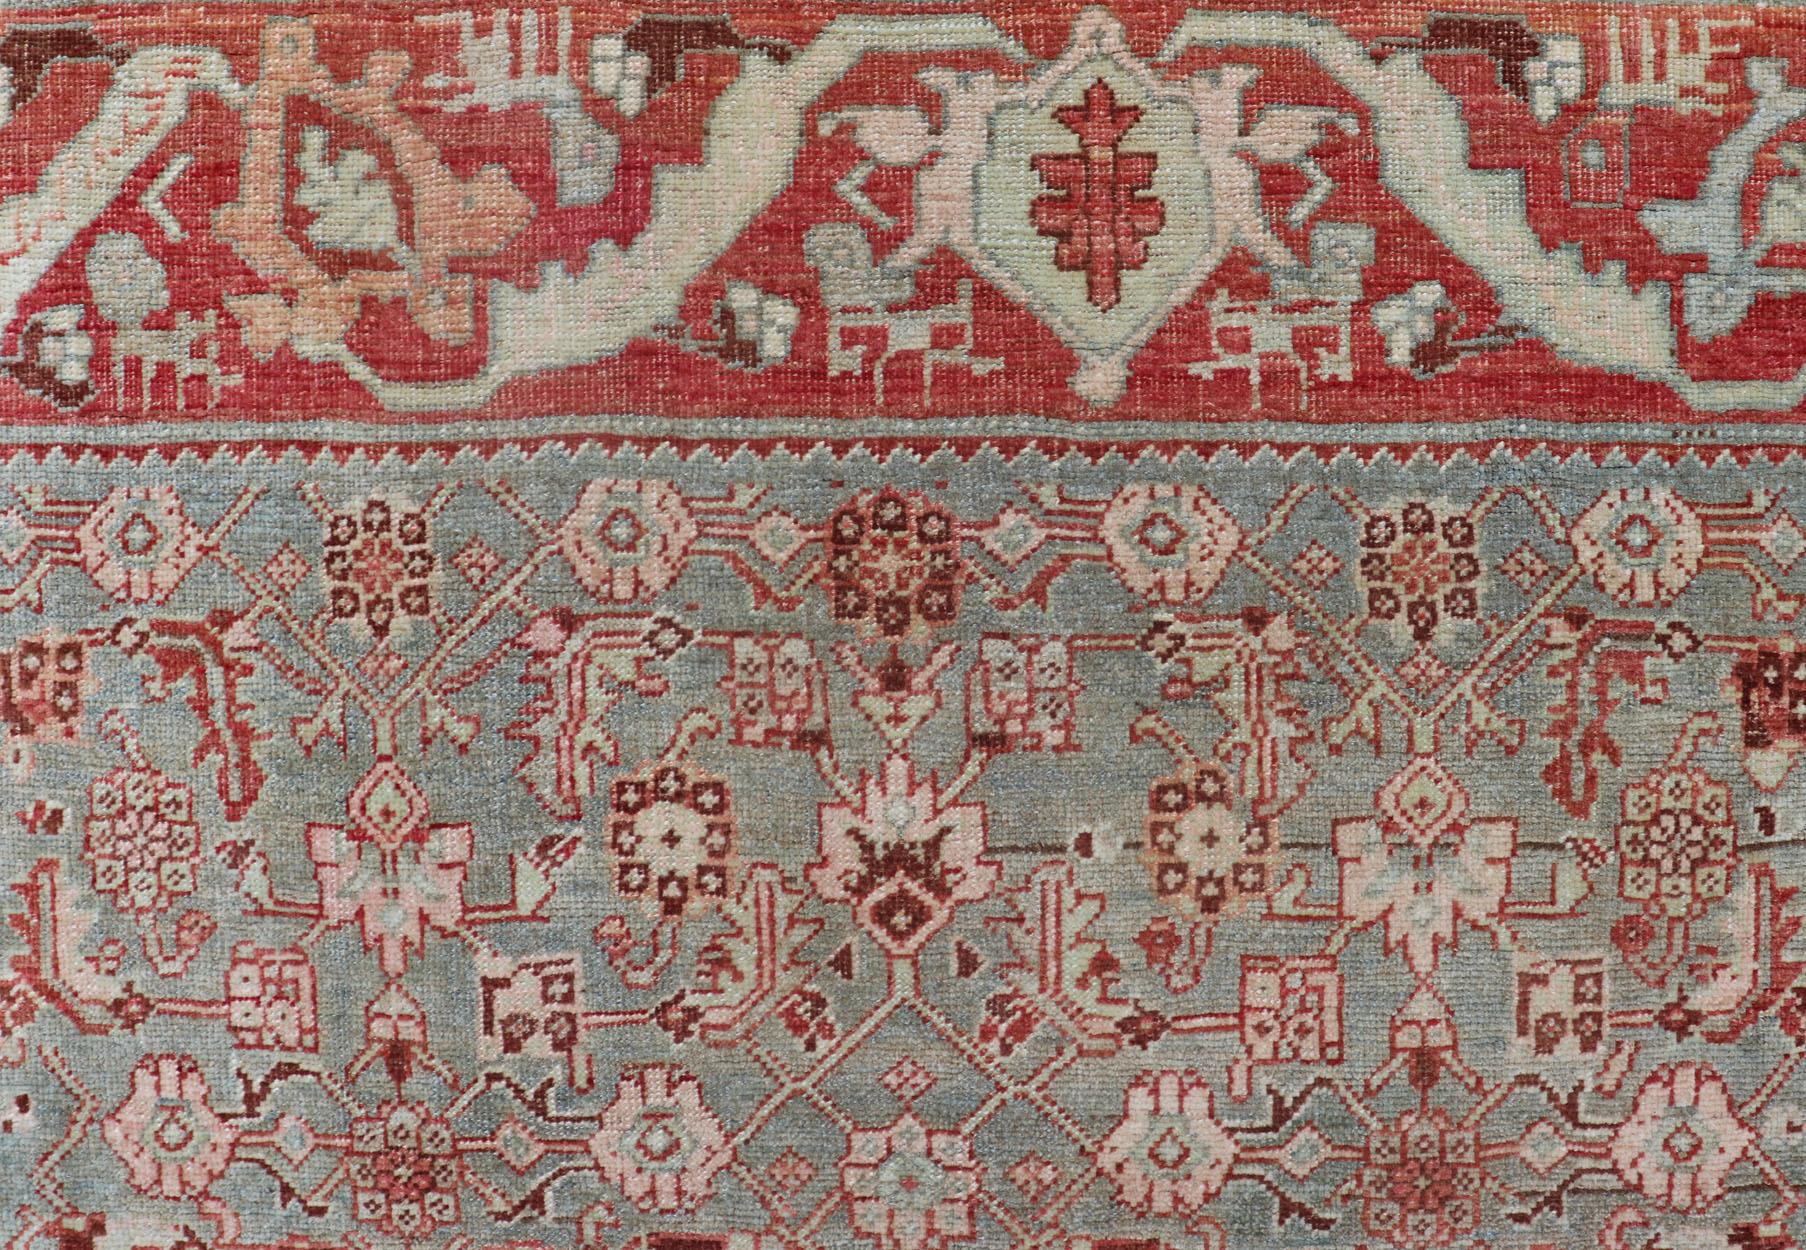 All over Herati flower design, antique Bidjar Persian rug in a variety of muted colors, rug EMB-9537-04-P13030, country of origin / type: Iran / Bidjar, circa 1900

This magnificent Bidjar with an exquisite, all-over Herati pattern, rests